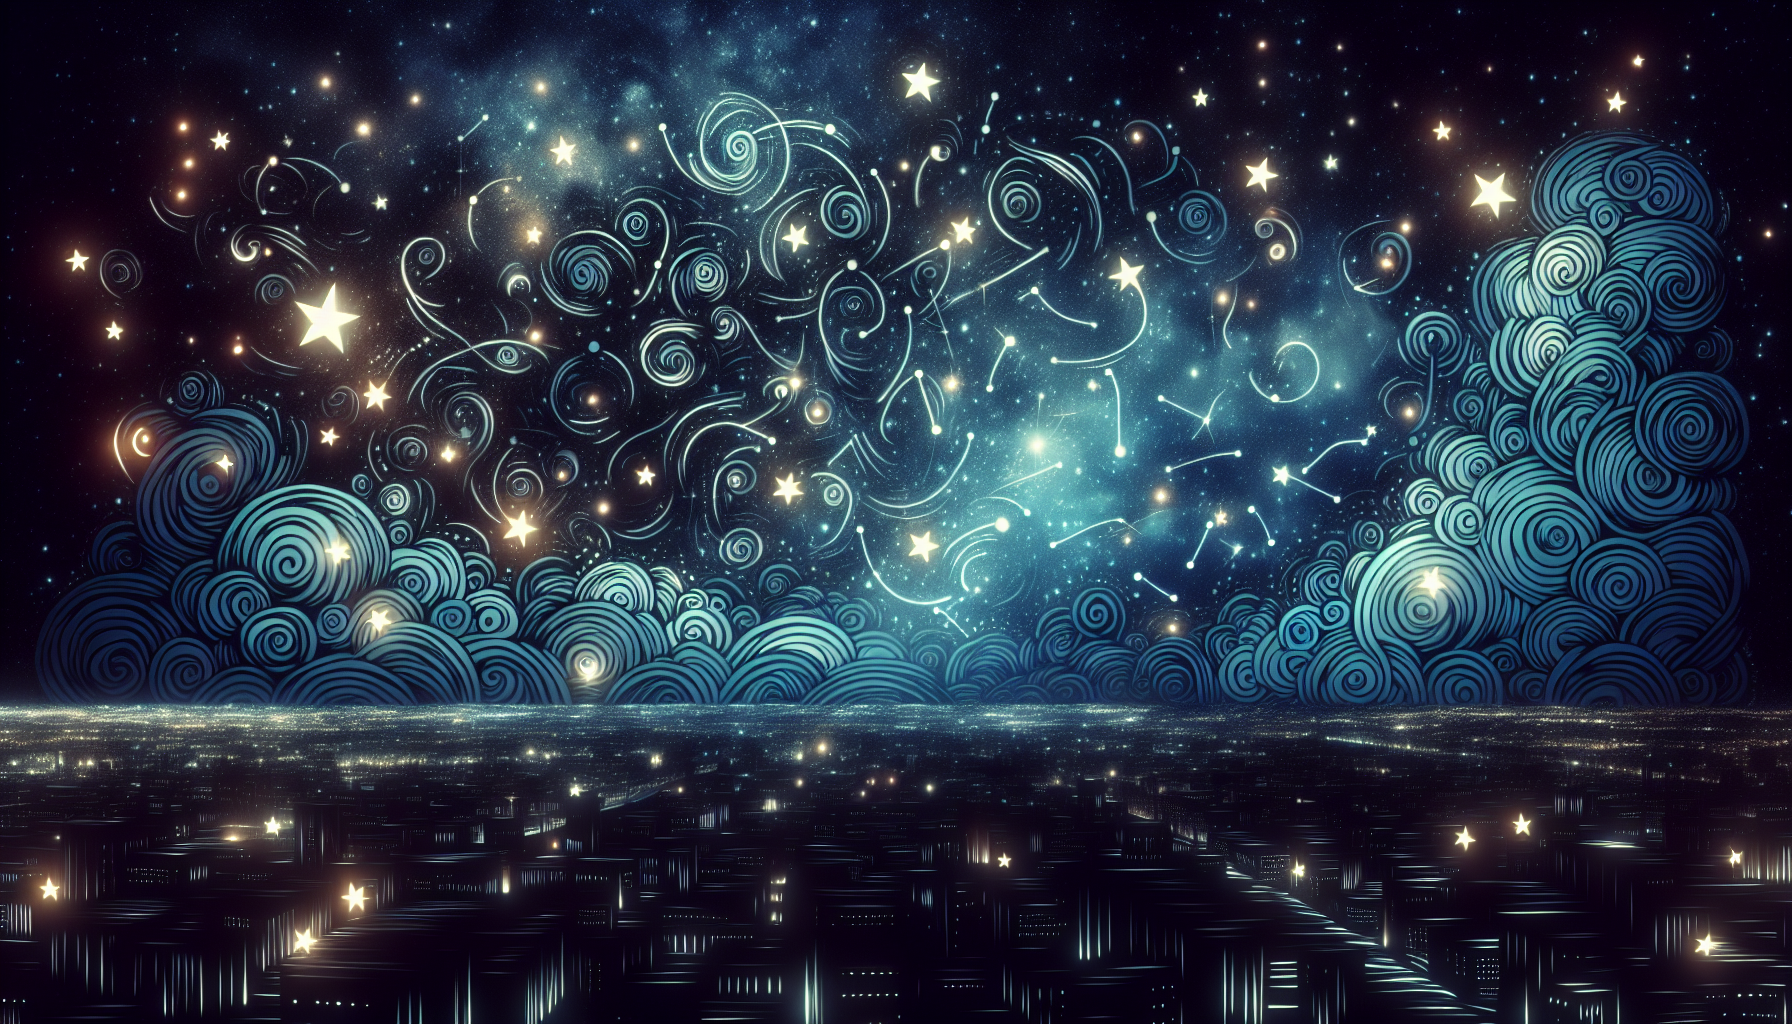 A whimsical illustration of a night sky with words related to luck and good fortune scattered among the stars.